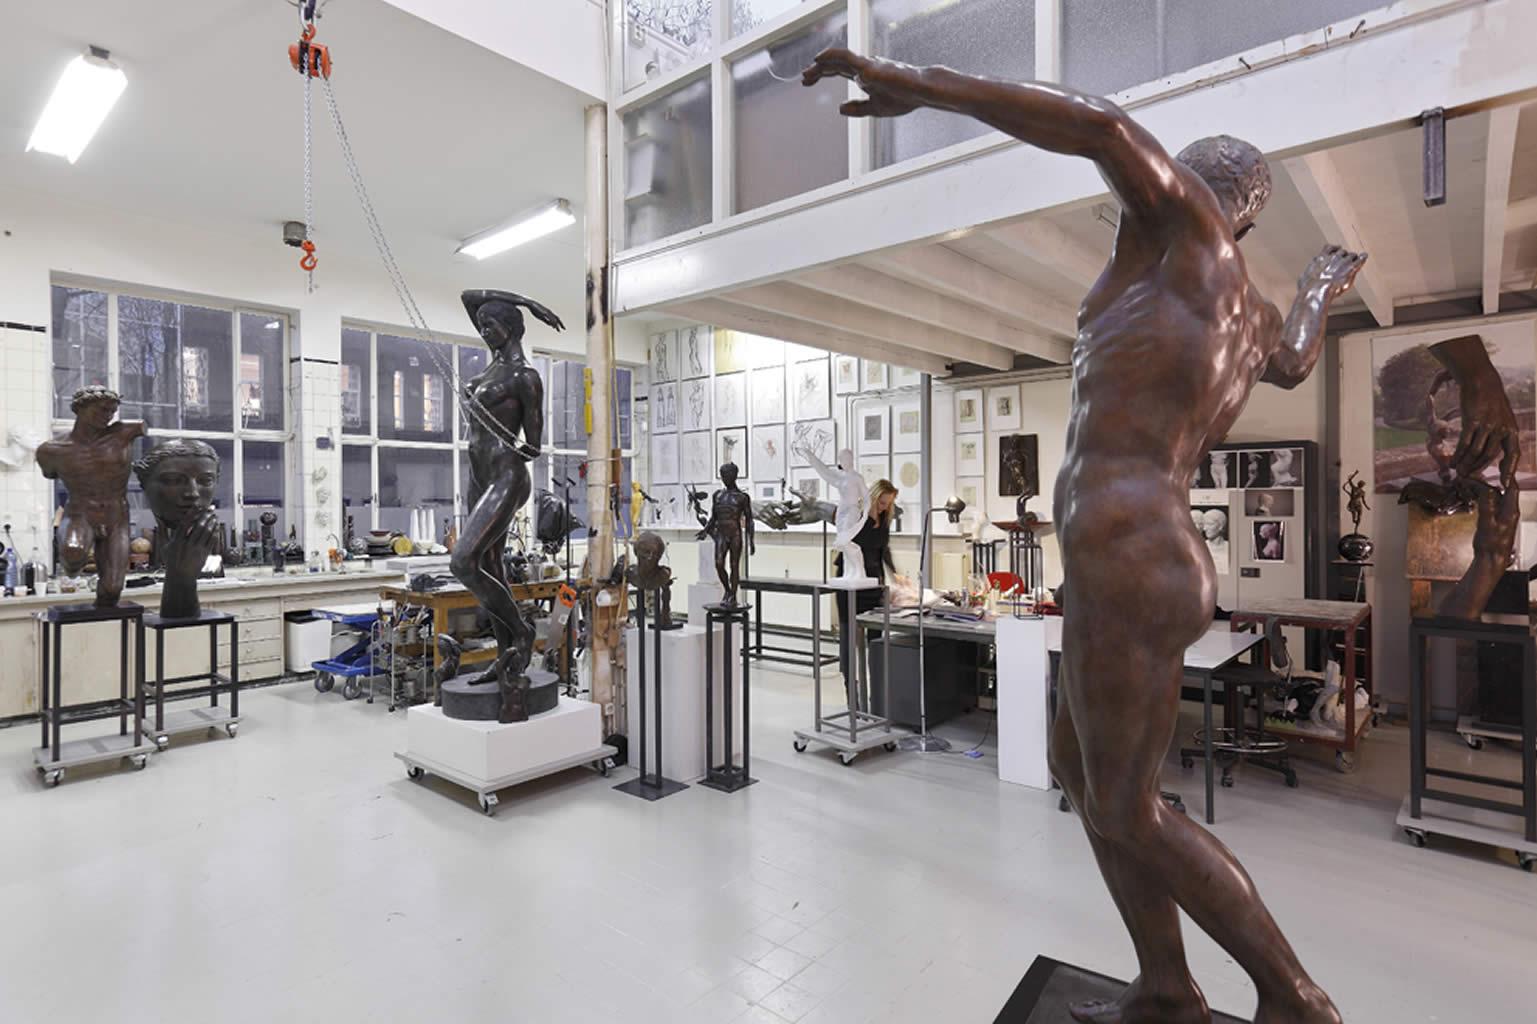 Danse Mystique Dance Mystic Bronze Sculpture Classical Contemporary

The sculptures of Margot Homan (1956, Oss, the Netherlands) show a perfect command of the old craft of modelling and sculpting, with which she continually develops an age old